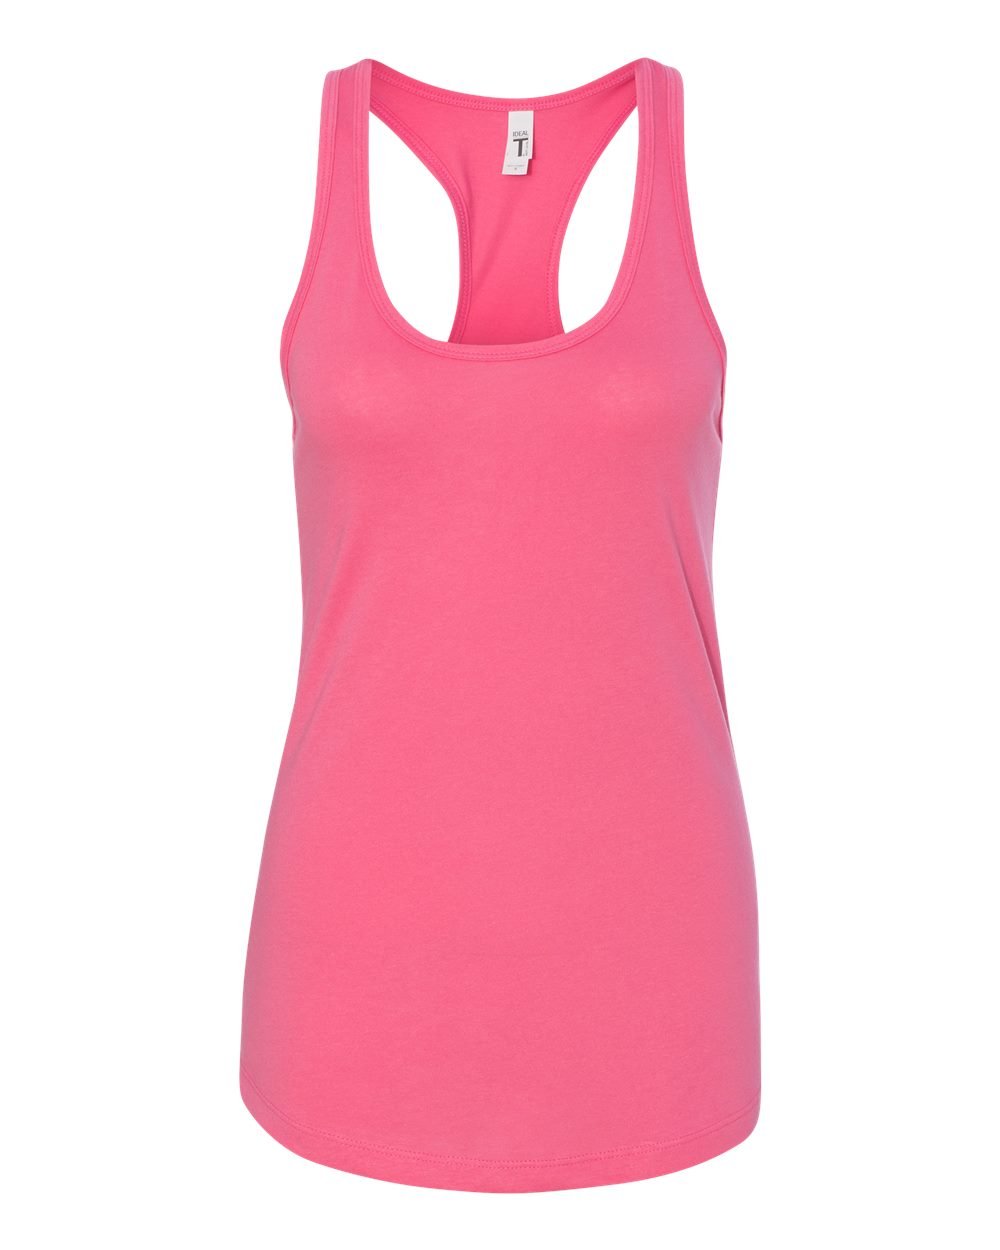 Next Level Ideal Racerback Tank Hot Pink X-Large (Pack of 5)